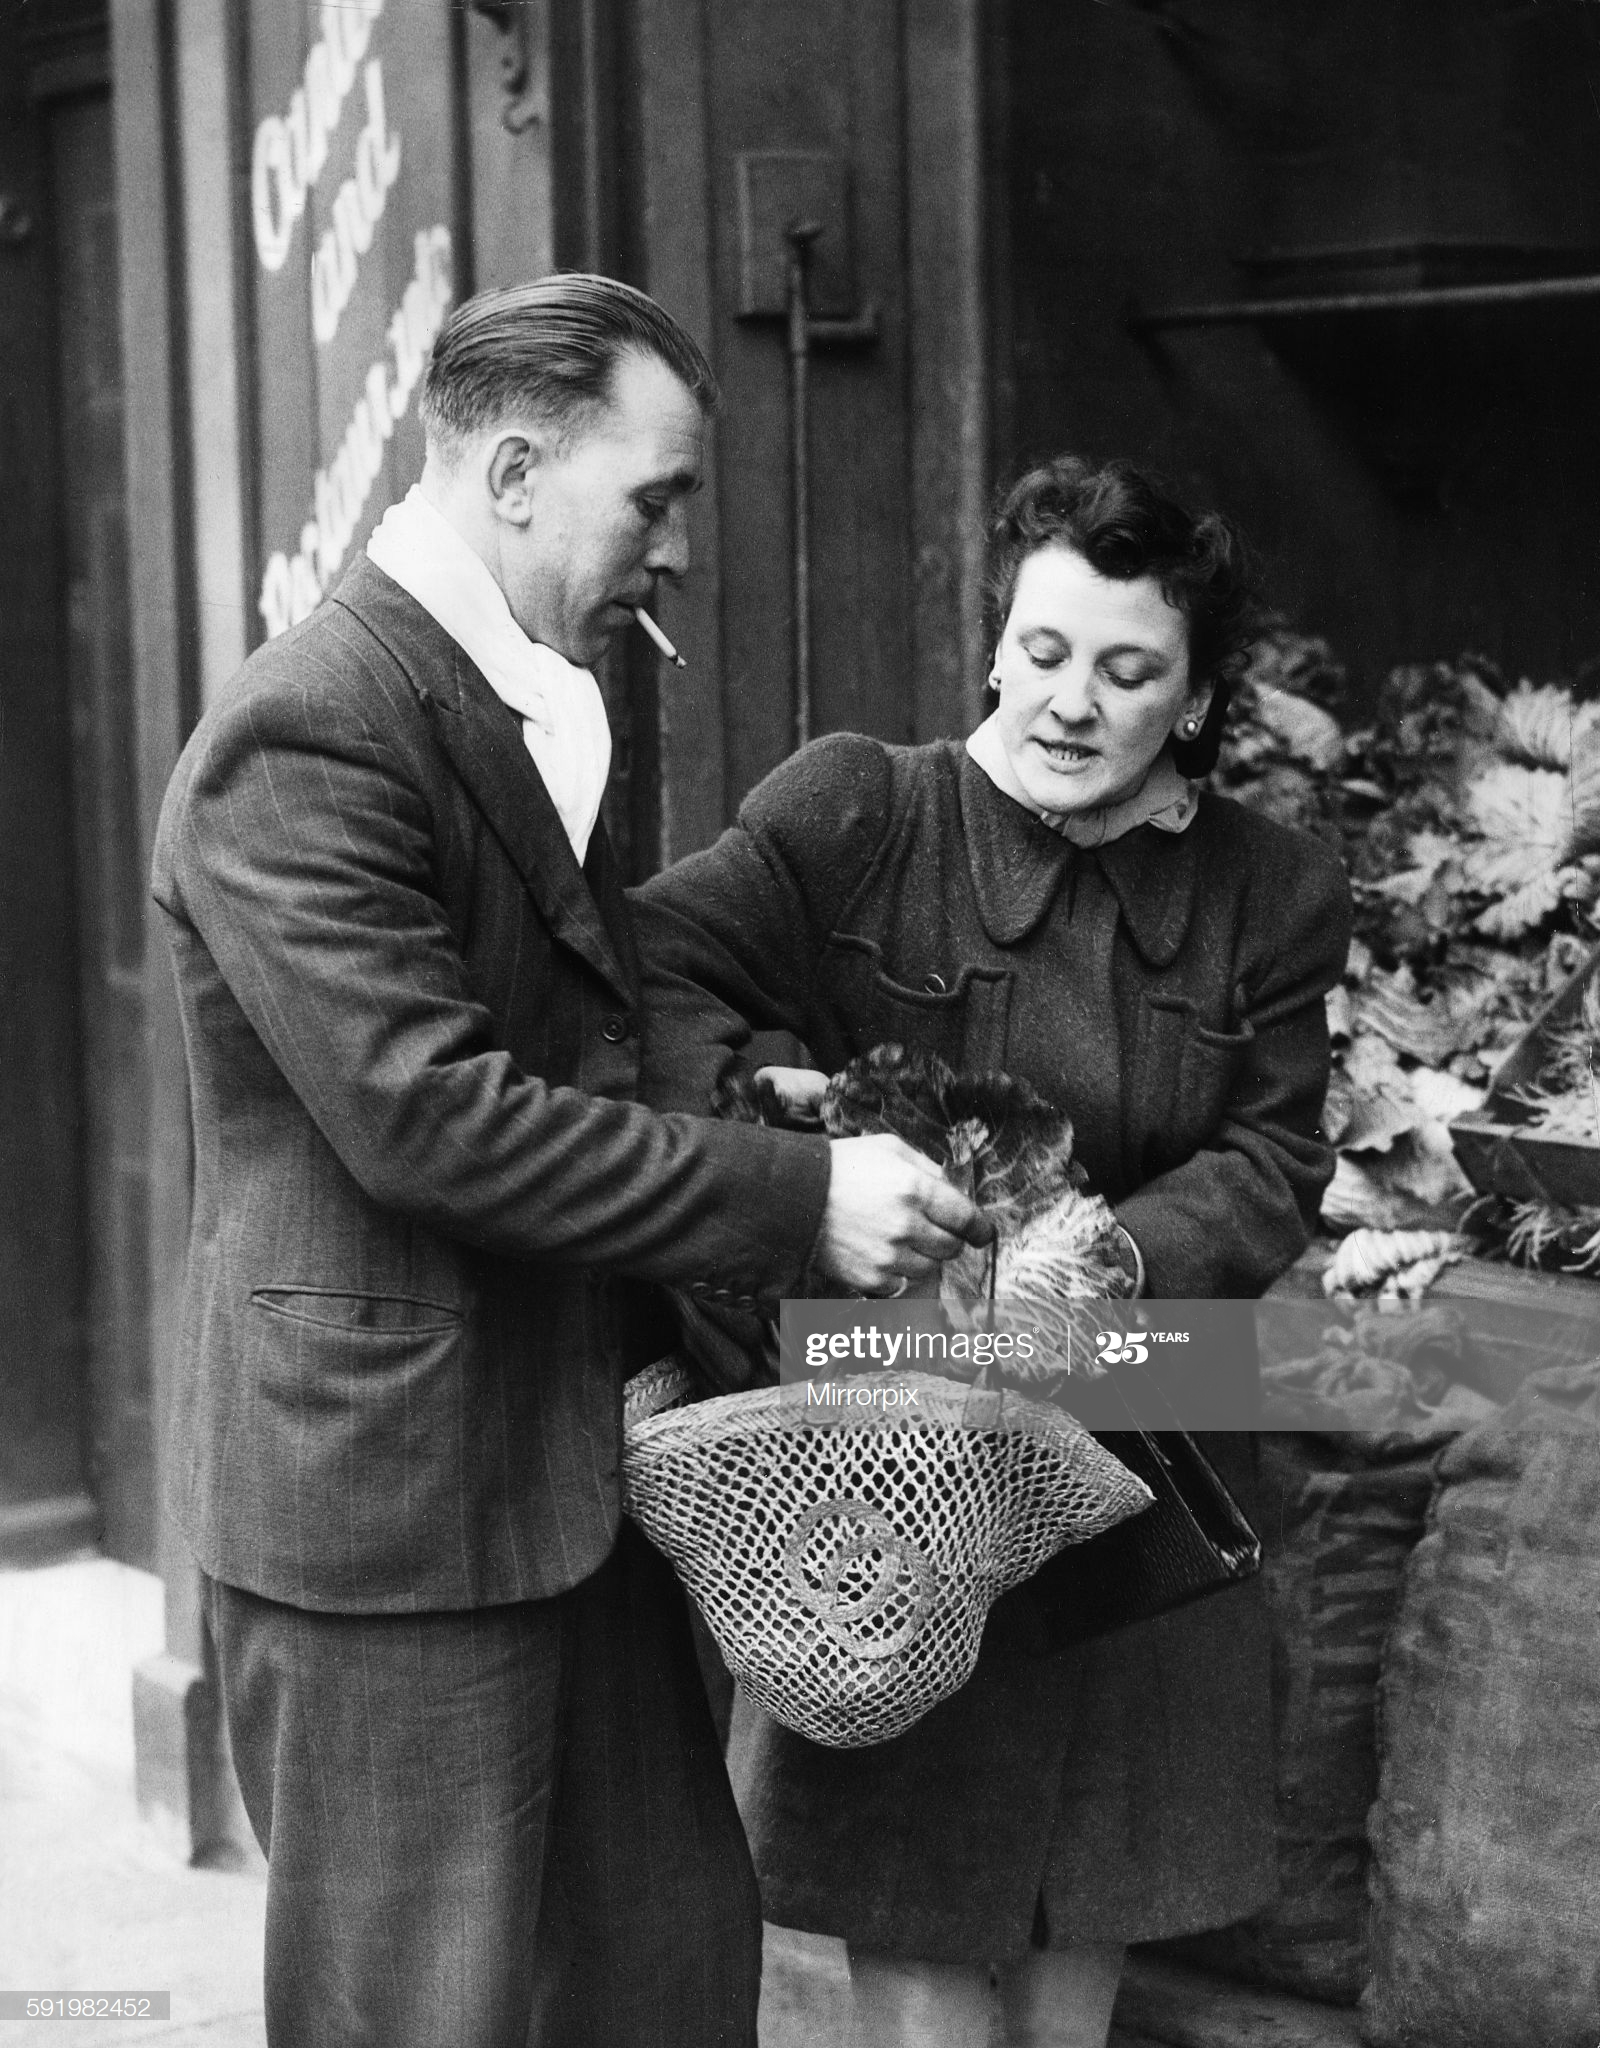 Private Ted Saunders of the 2nd Army out shopping with his wife Margaret in Bermondsey while on leave during the Second World War. 7th January 1945.  X.png